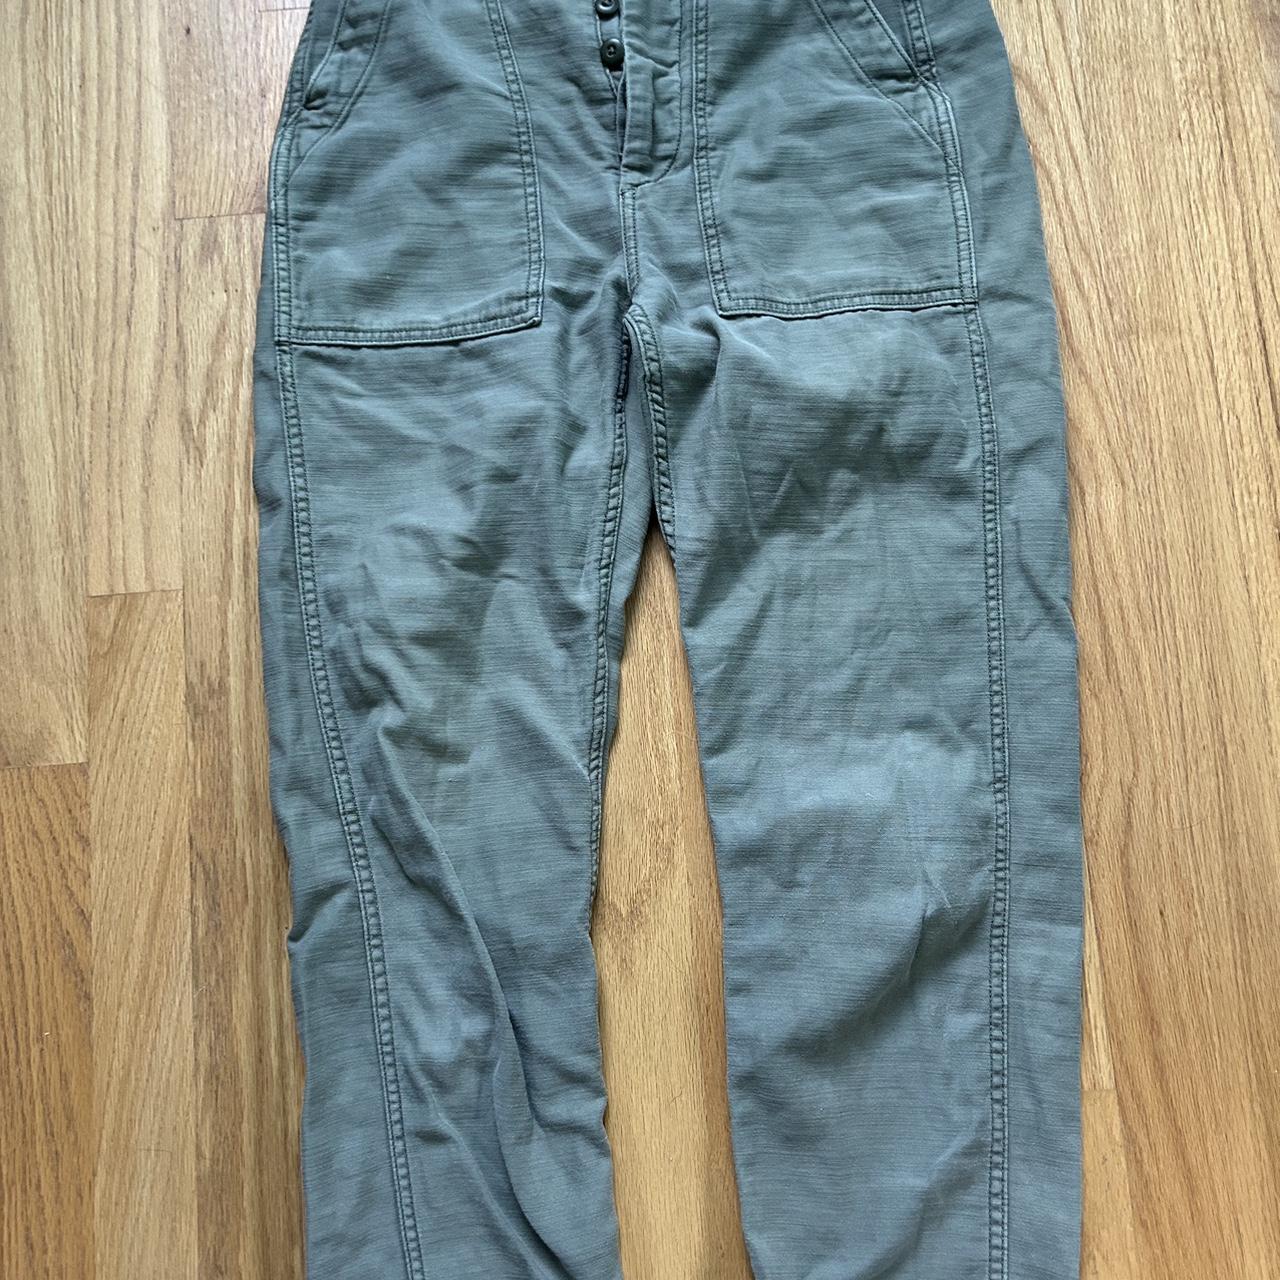 American Eagle army fatigue button fly pants Size... - Depop